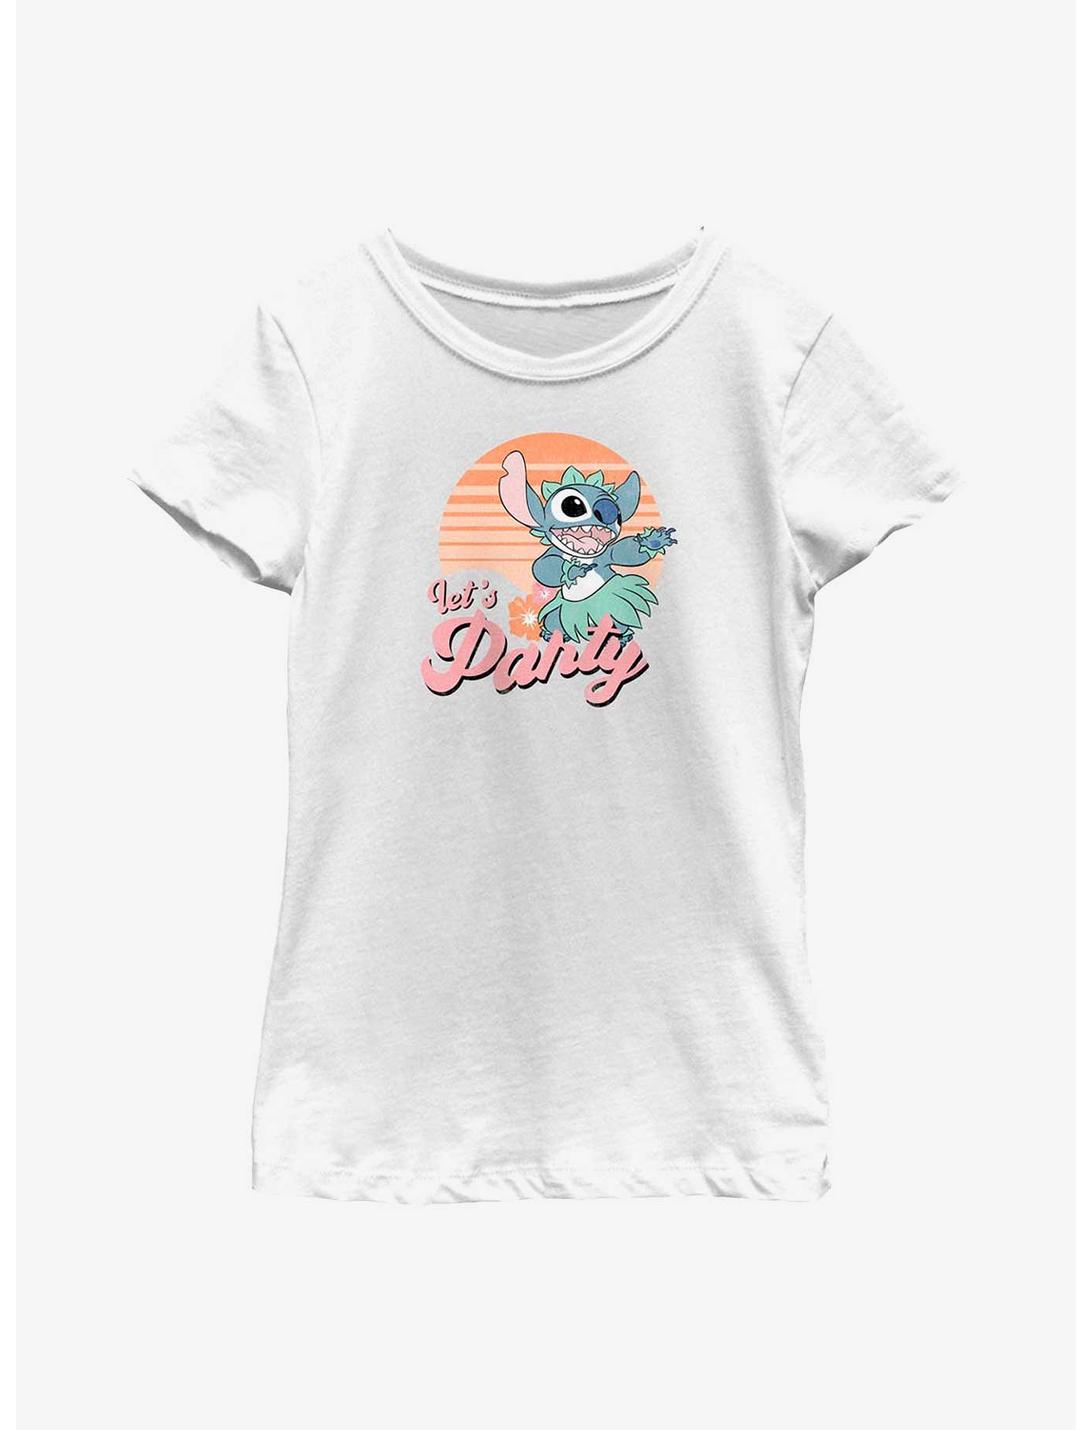 Disney Lilo & Stitch Let's Party Youth Girls T-Shirt, WHITE, hi-res